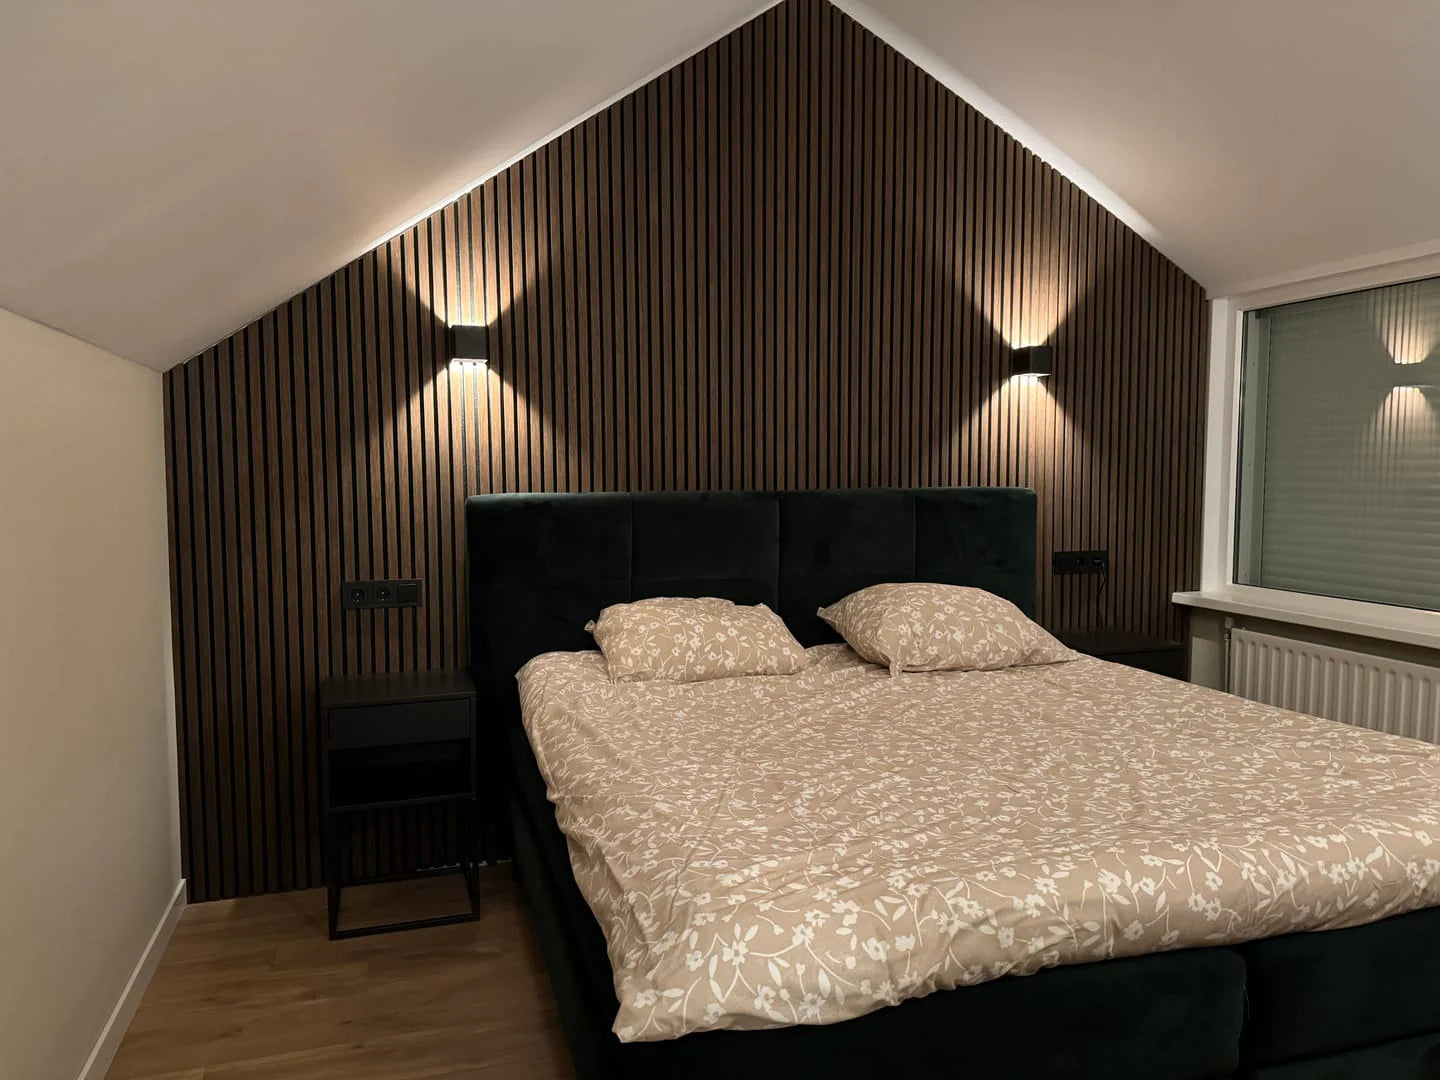 Effective soundproof acoustic panels for your bedroom